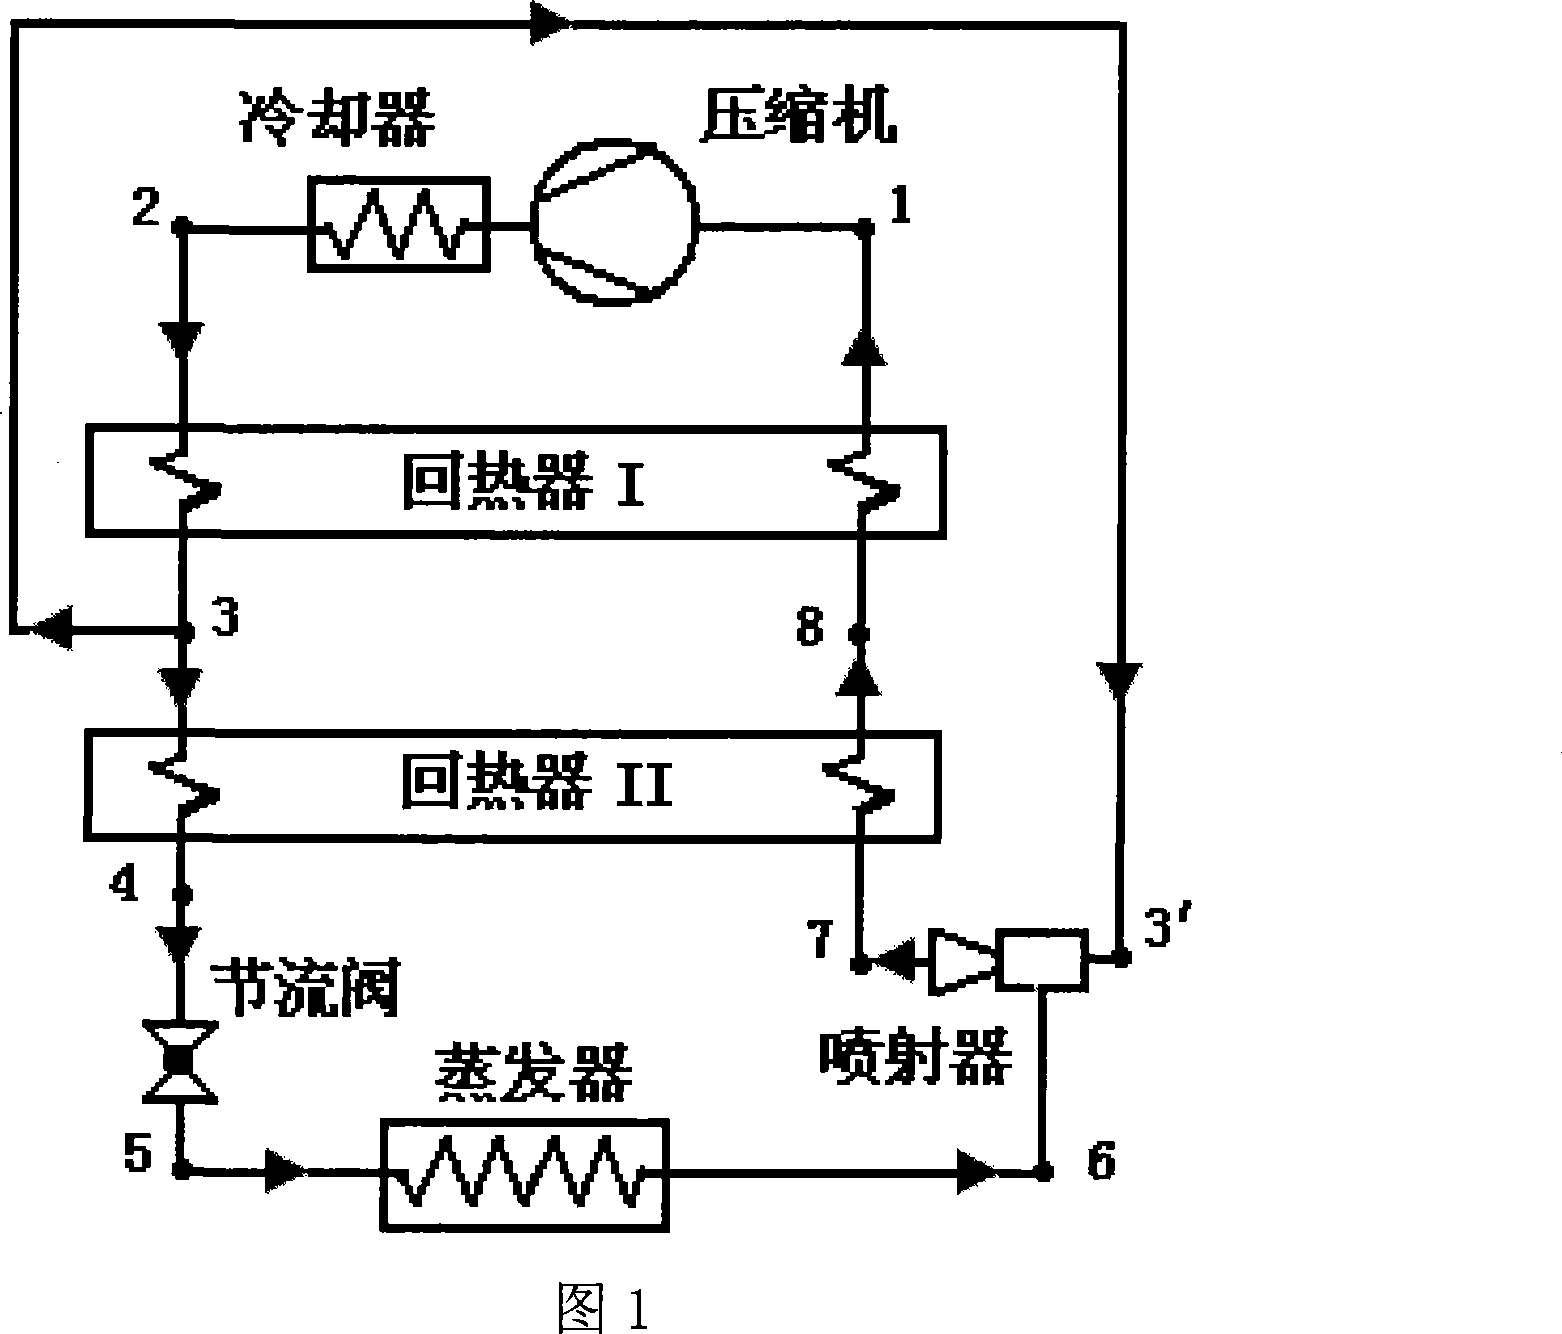 Small-sized throttle low temperature refrigerator circulating system with injector